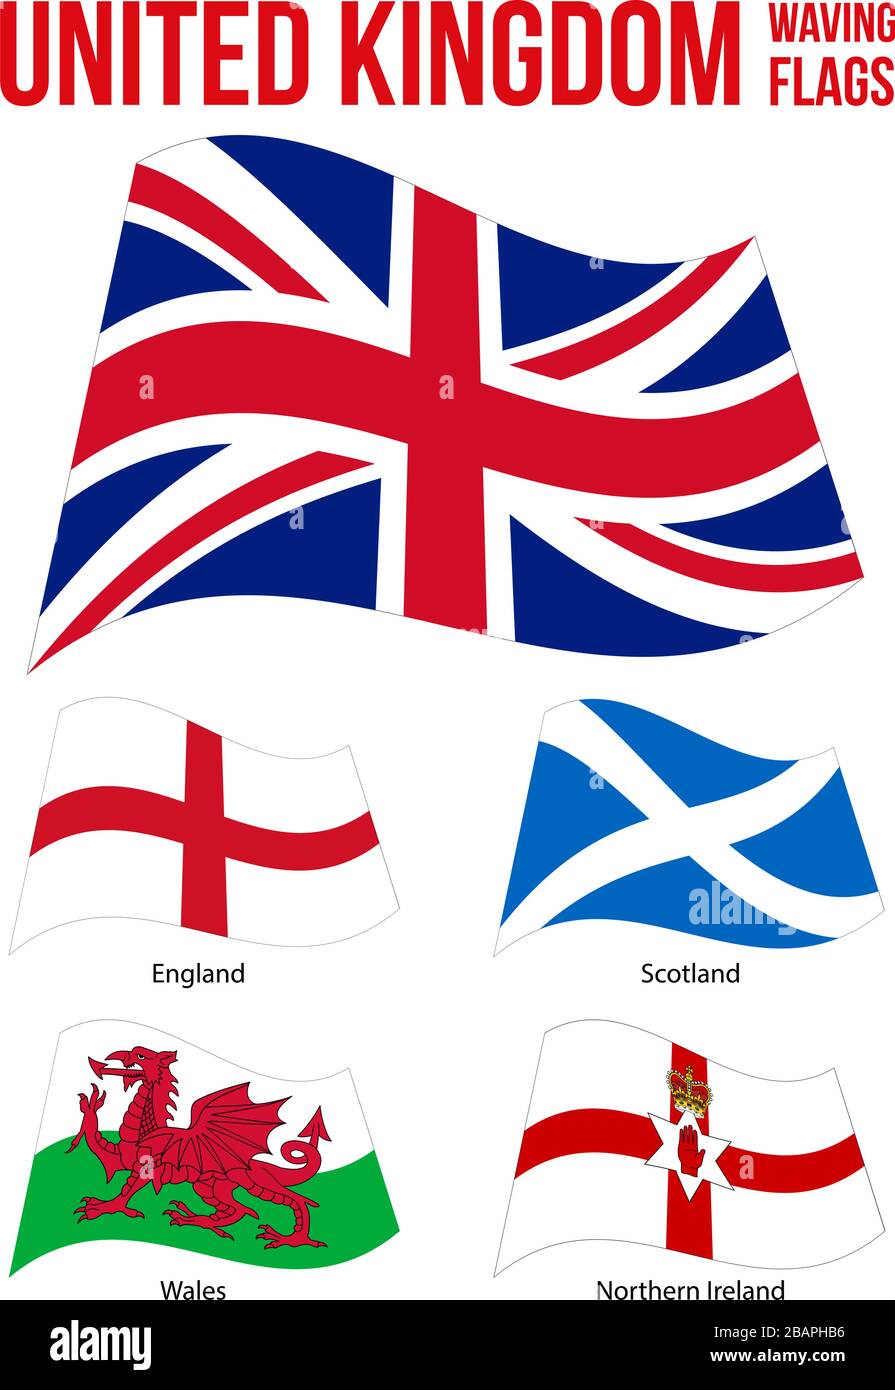 United Kingdom Waving Flags Collection Vector Illustration on White Background. Countries of the United Kingdom. Flag of England, Northern Ireland, Wa Stock Vector